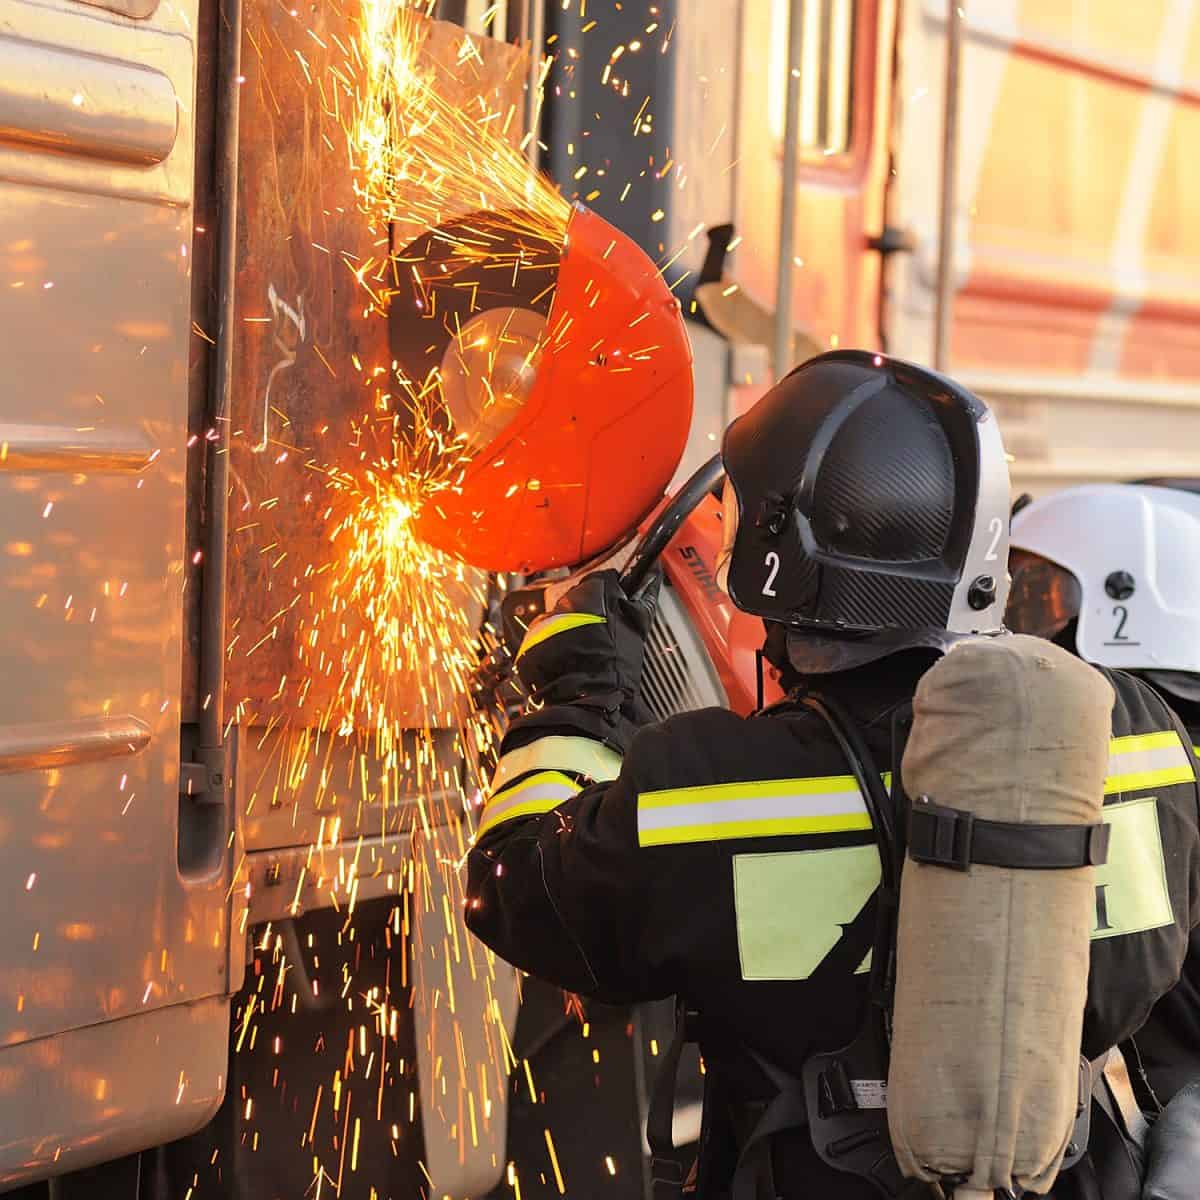 A fireman using a rotary saw in their emergency fire excercise